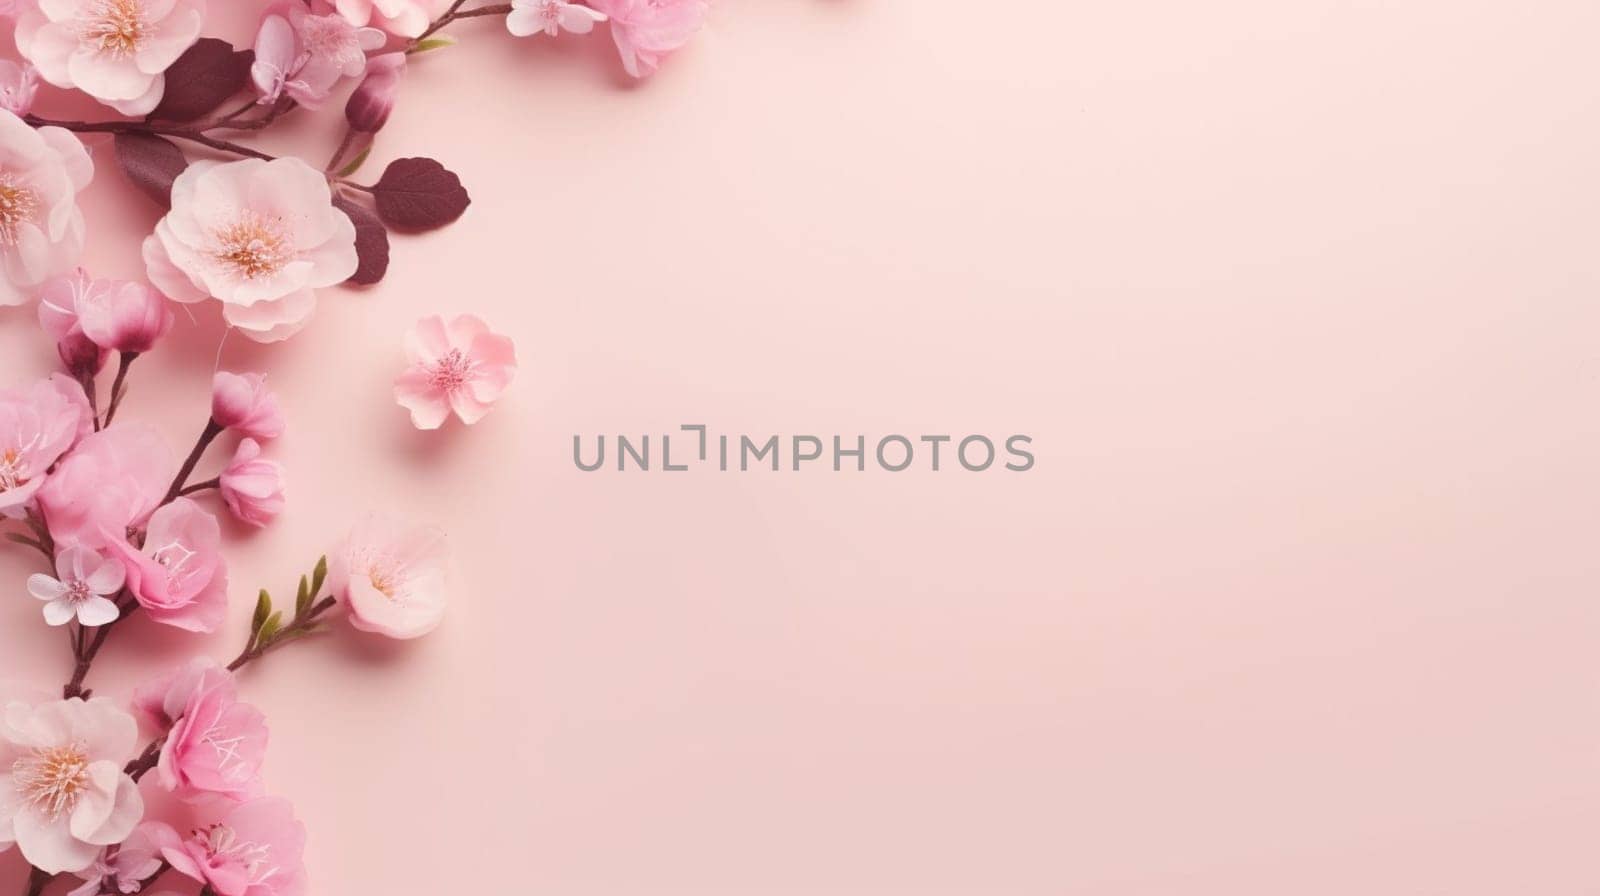 Elegant cherry blossoms arrayed across the top left side create a tranquil scene on a soft pink background, offering a serene, springtime ambiance. High quality photo